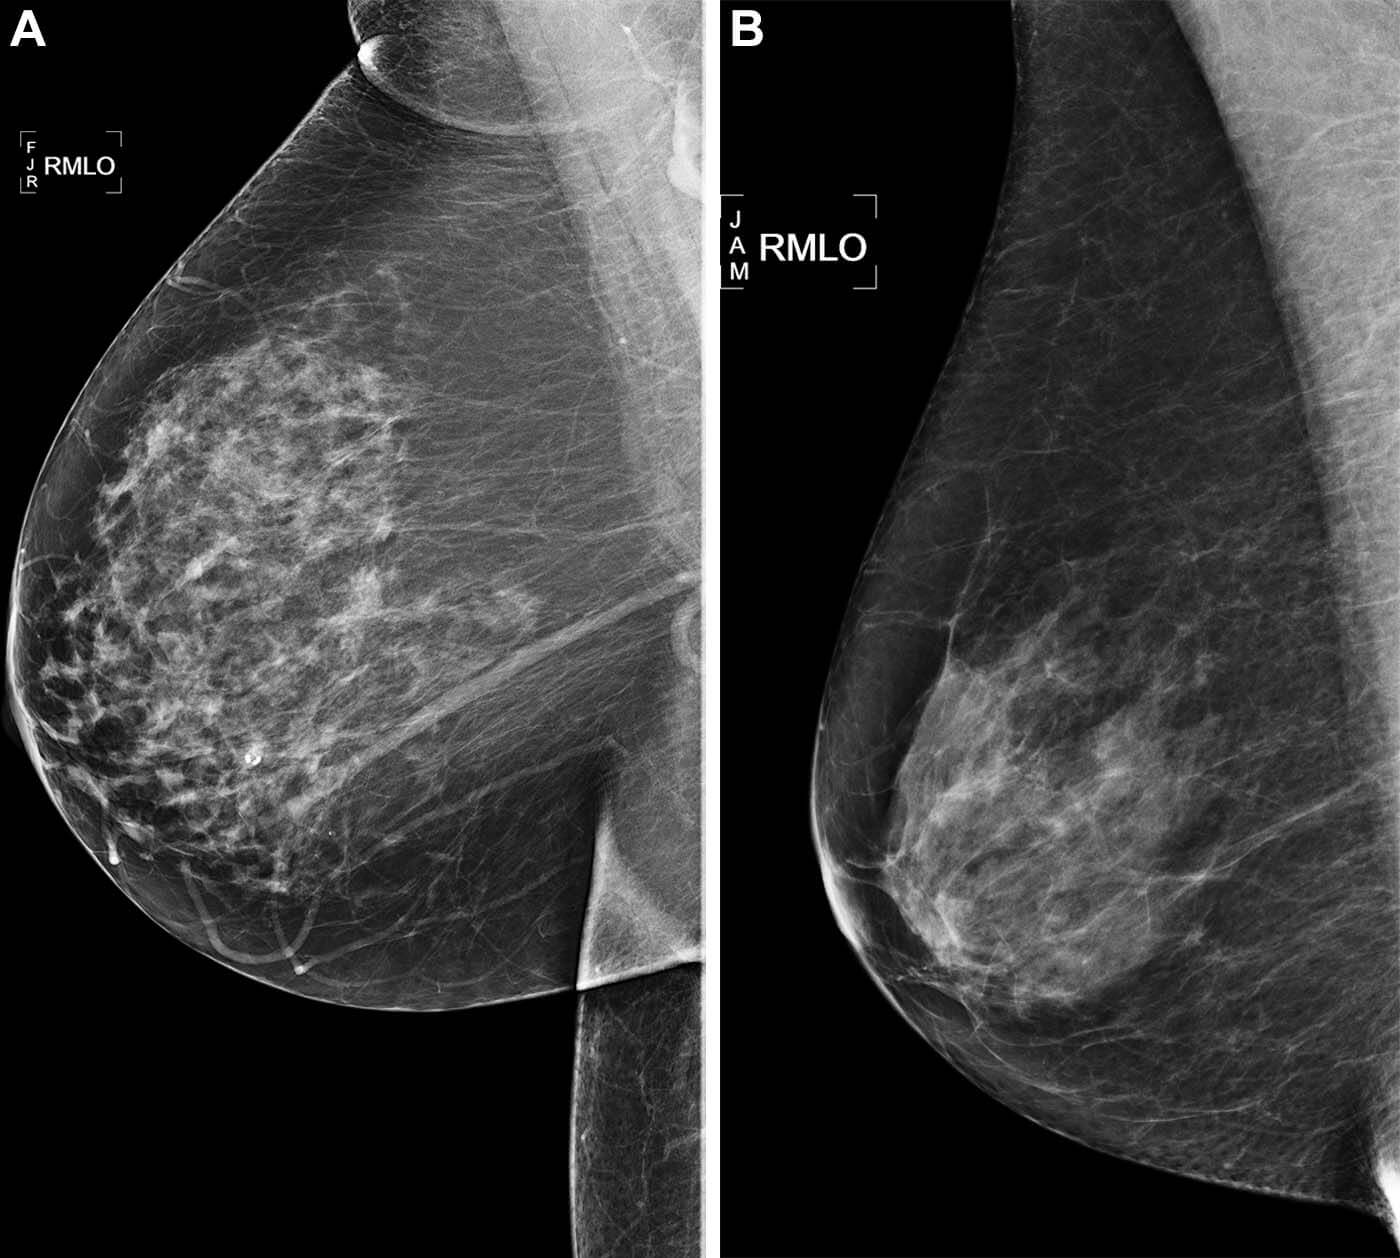 mammogram scans detecting breast cancer